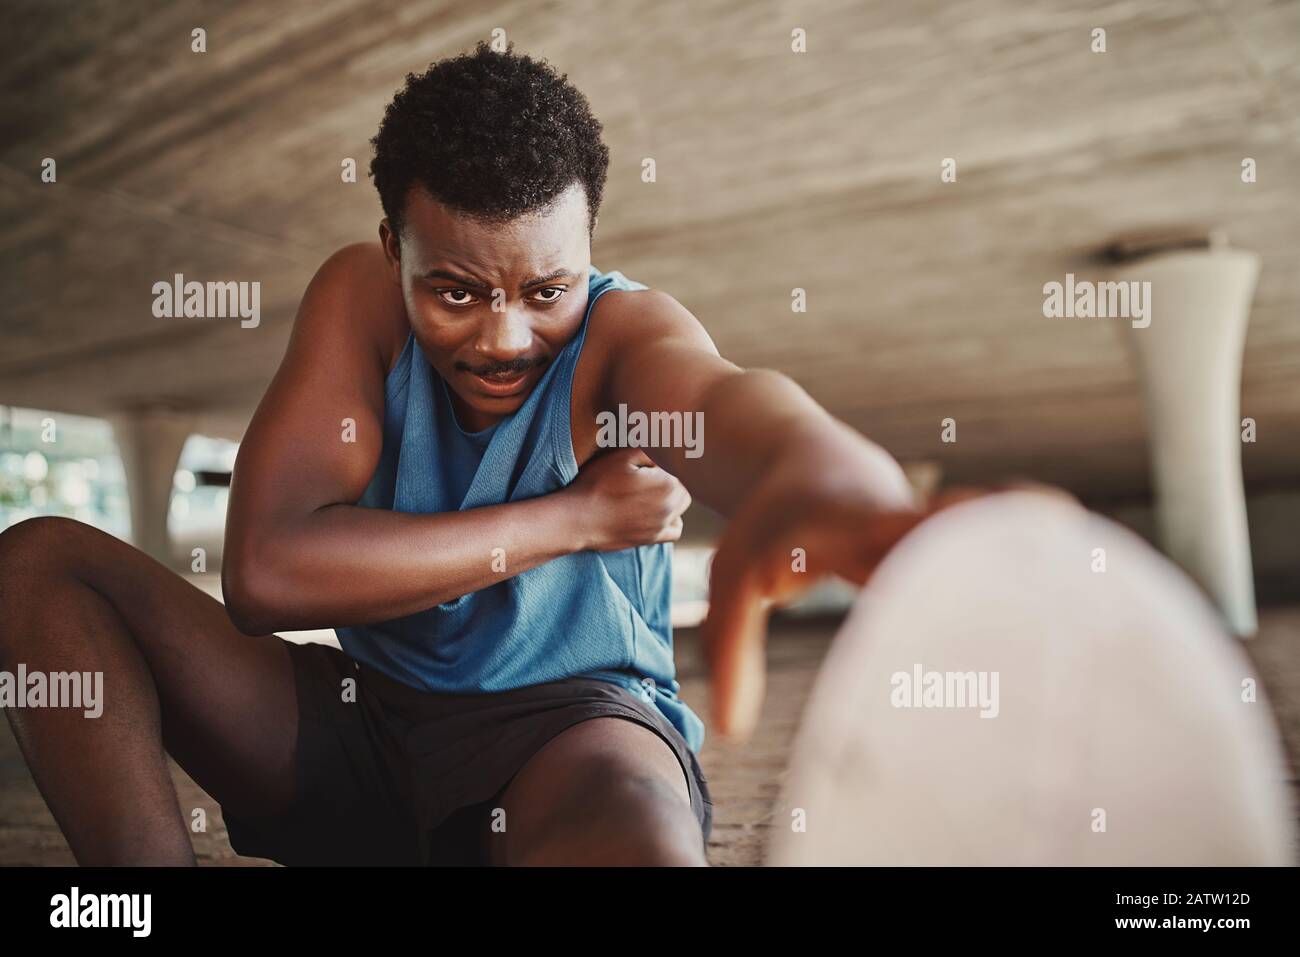 Portrait of a male runner trying hard to stretch his legs before running outdoors Stock Photo